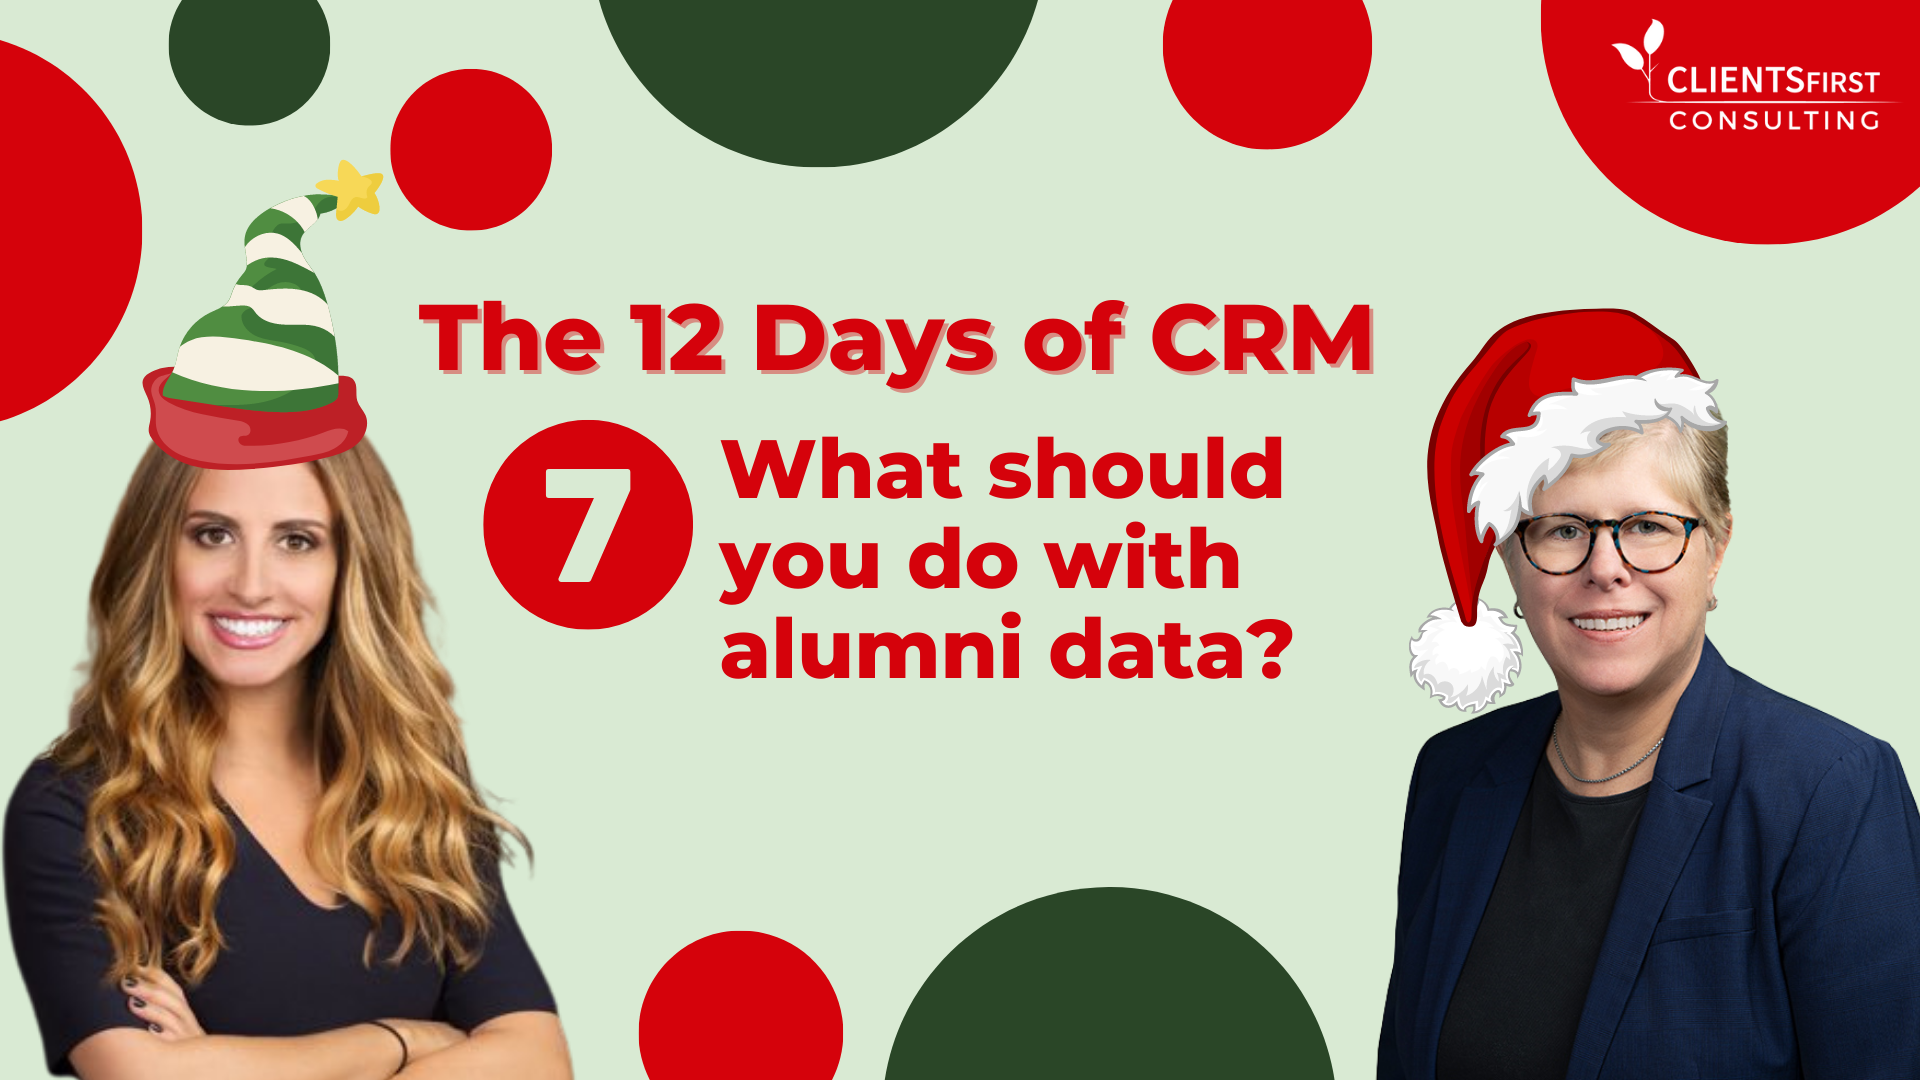 What Should You Do With Alumni Data?